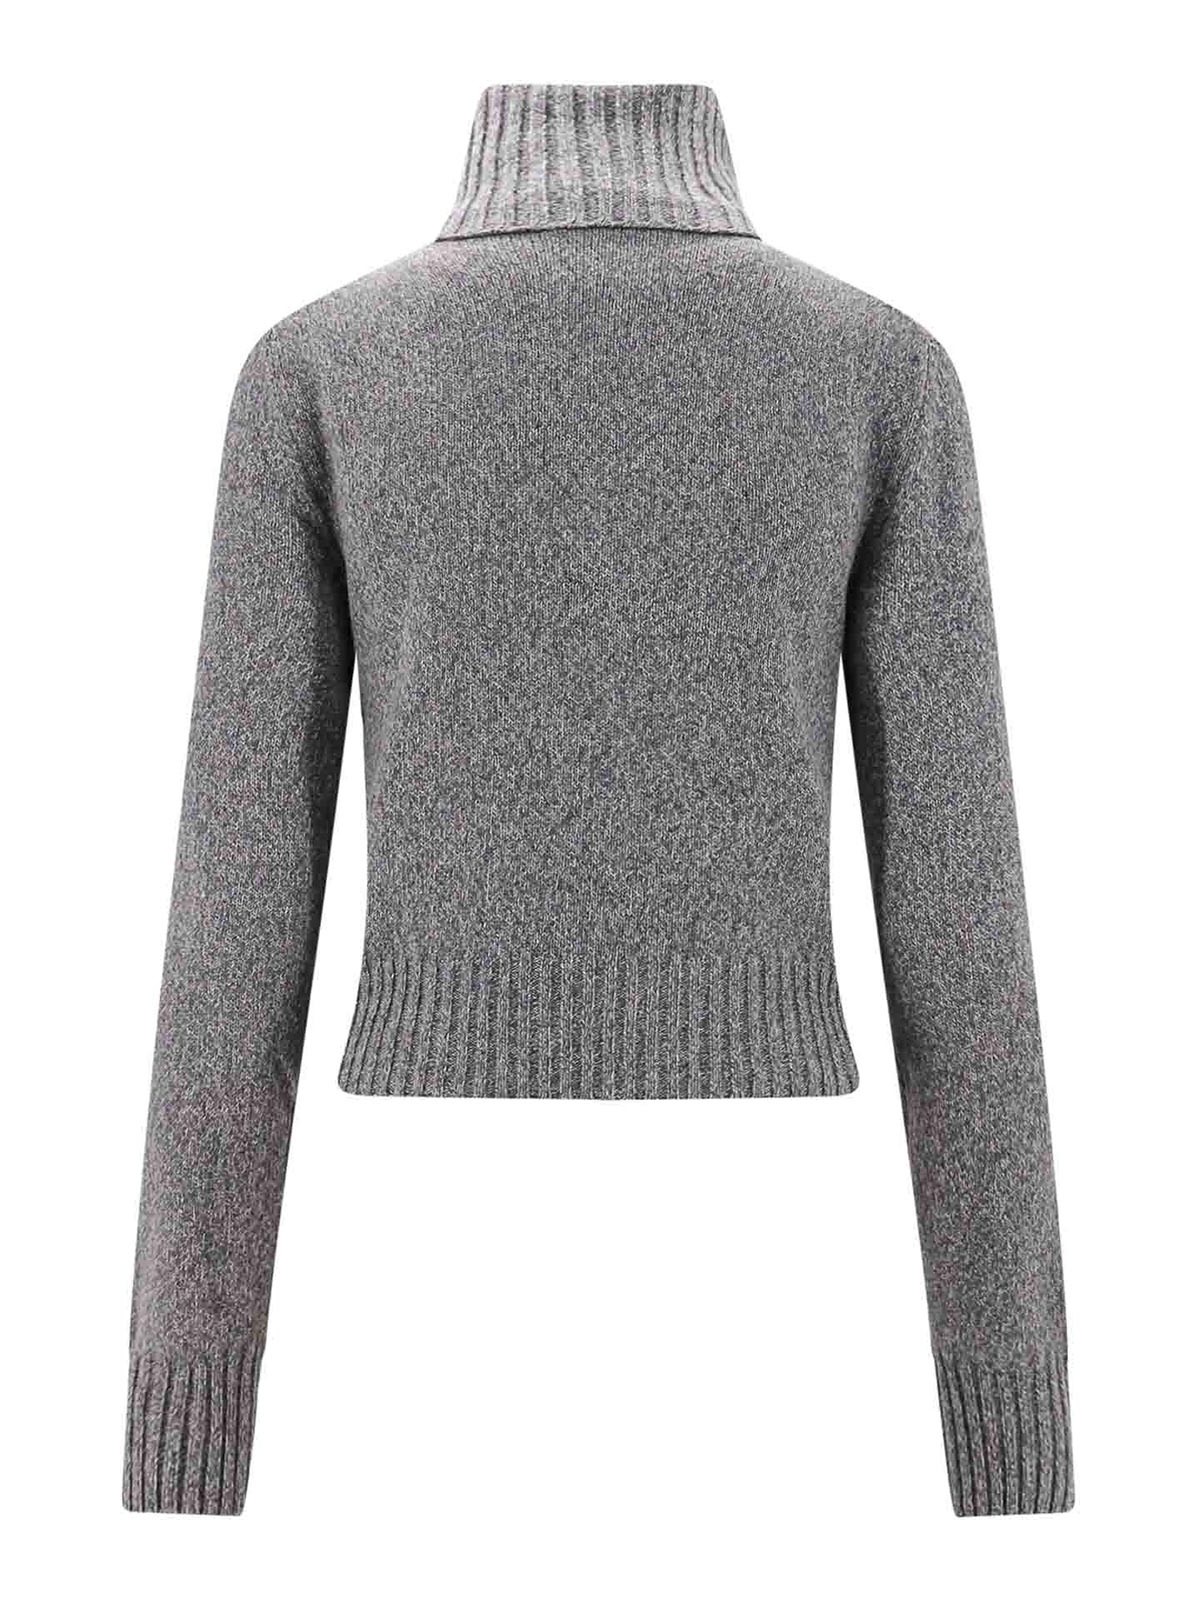 Shop Ami Alexandre Mattiussi Cashmere And Wool Sweater In Gris